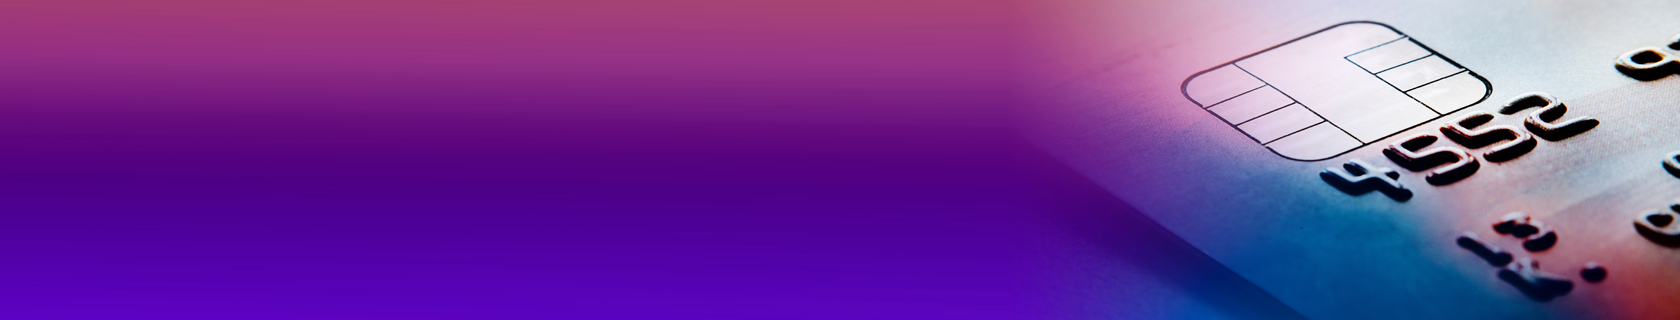 gradient with credit card